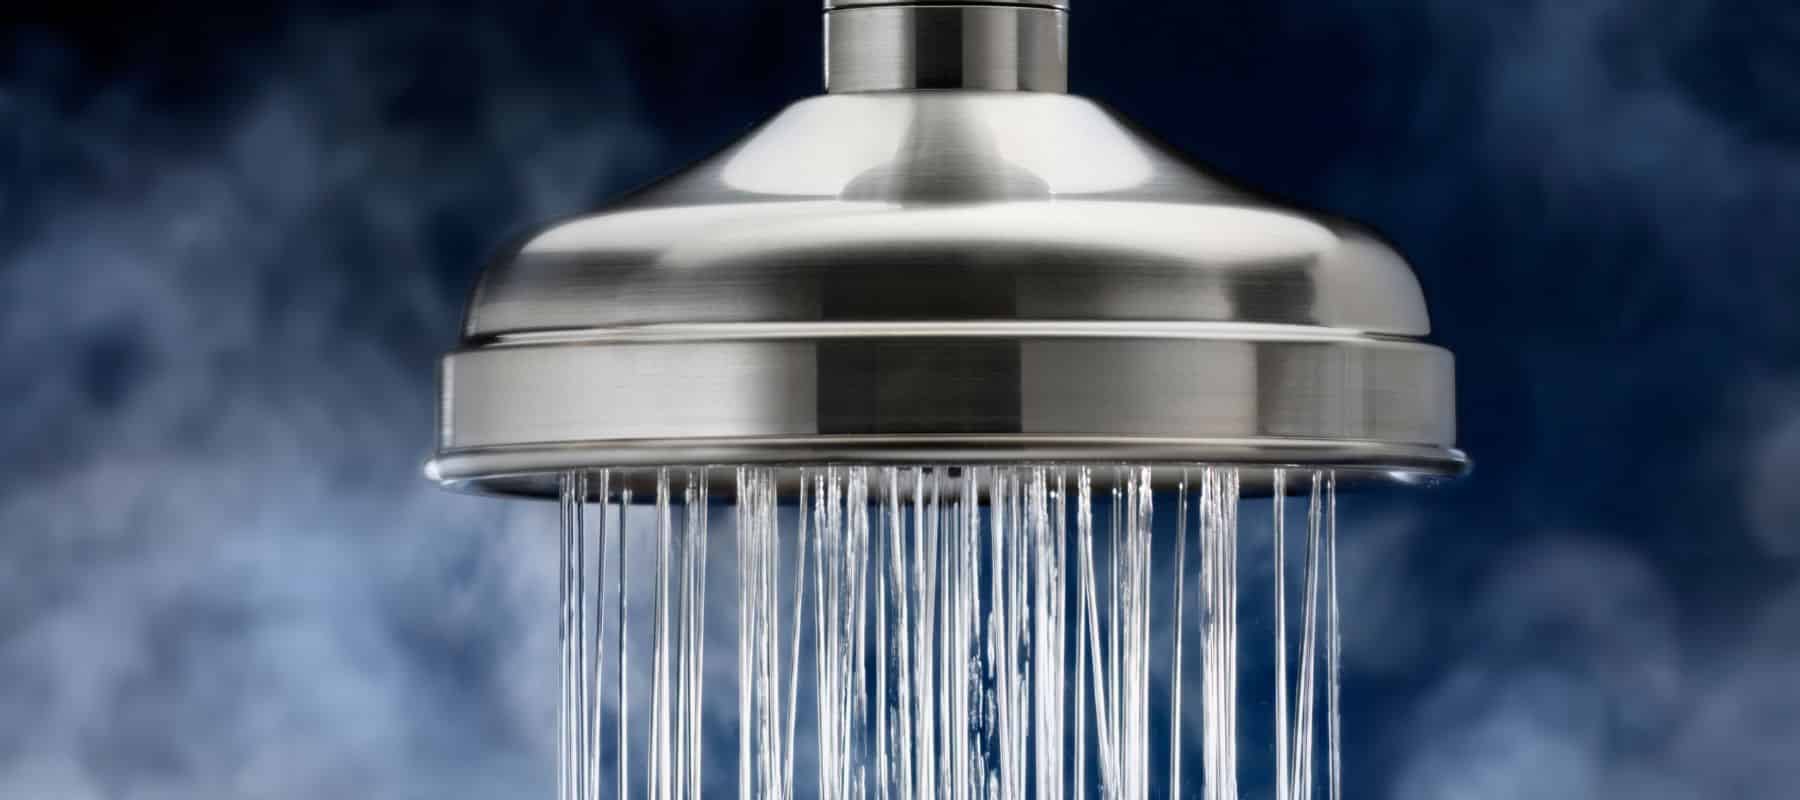 steam coming from a hot shower. Shower head with water flowing through it